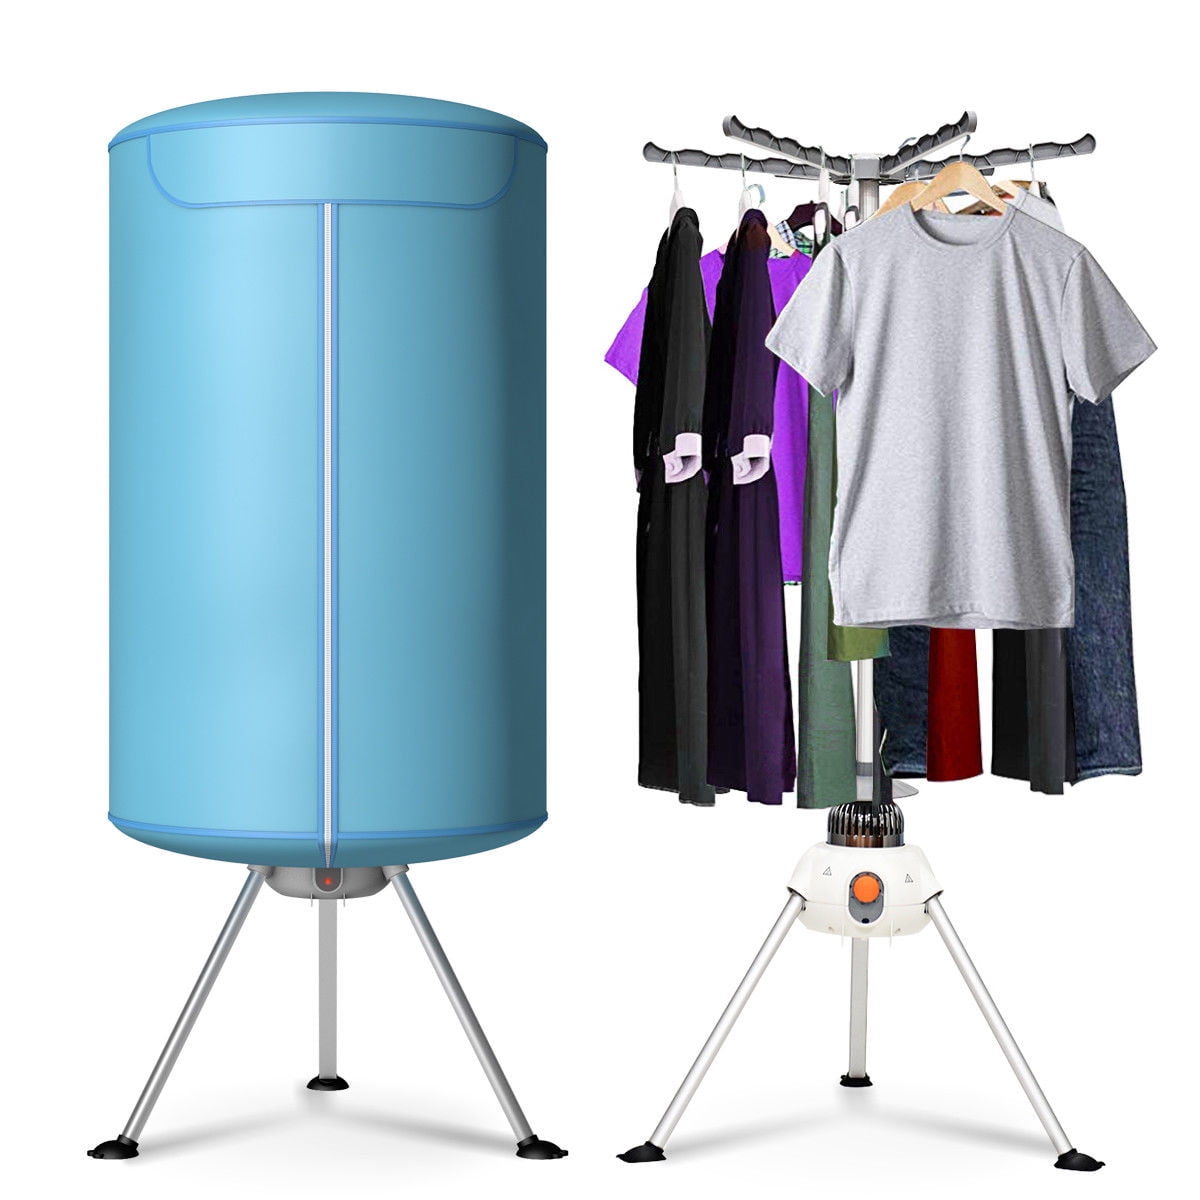 How To Dry Clothes | lupon.gov.ph